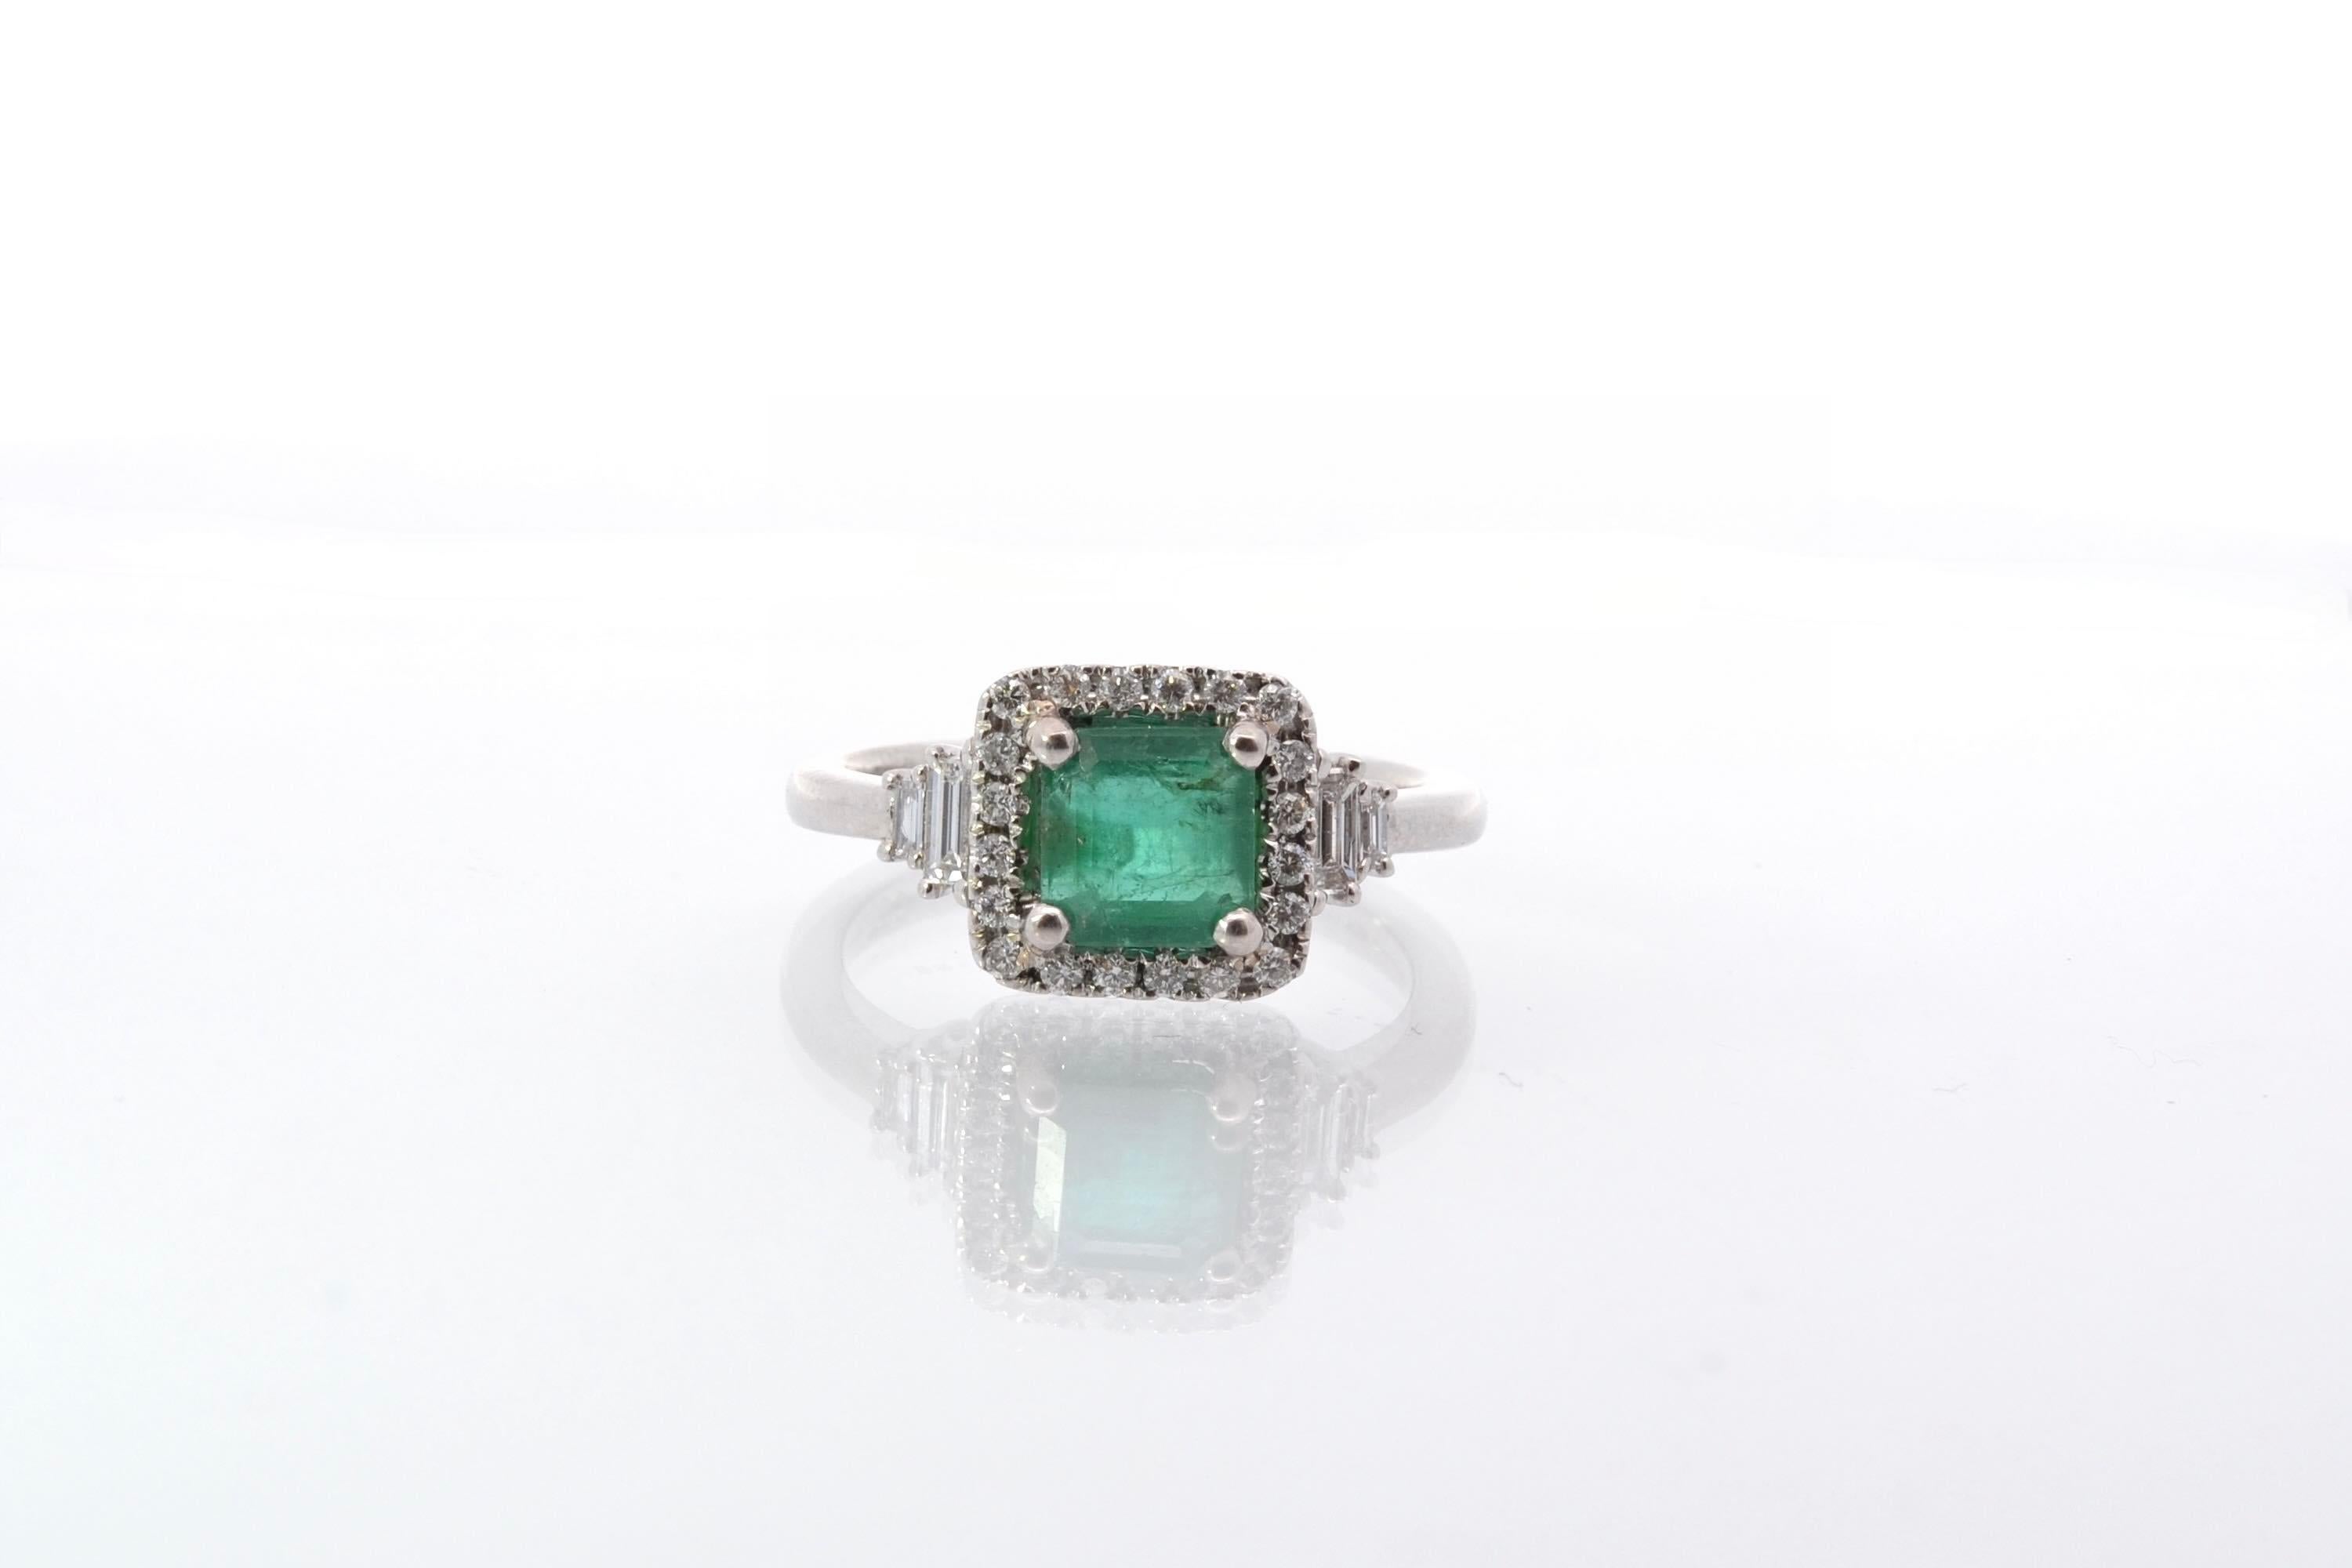 Stones: Emerald: 1.55 cts, 20 diamonds: 0.12 ct and 4 baguette diamonds: 0.20 ct
Material: 18k white gold
Dimensions: 1cm
Weight: 4.9g
Period: Recent vintage style
Size: 52 (free sizing)
Certificate
Ref. : 25574